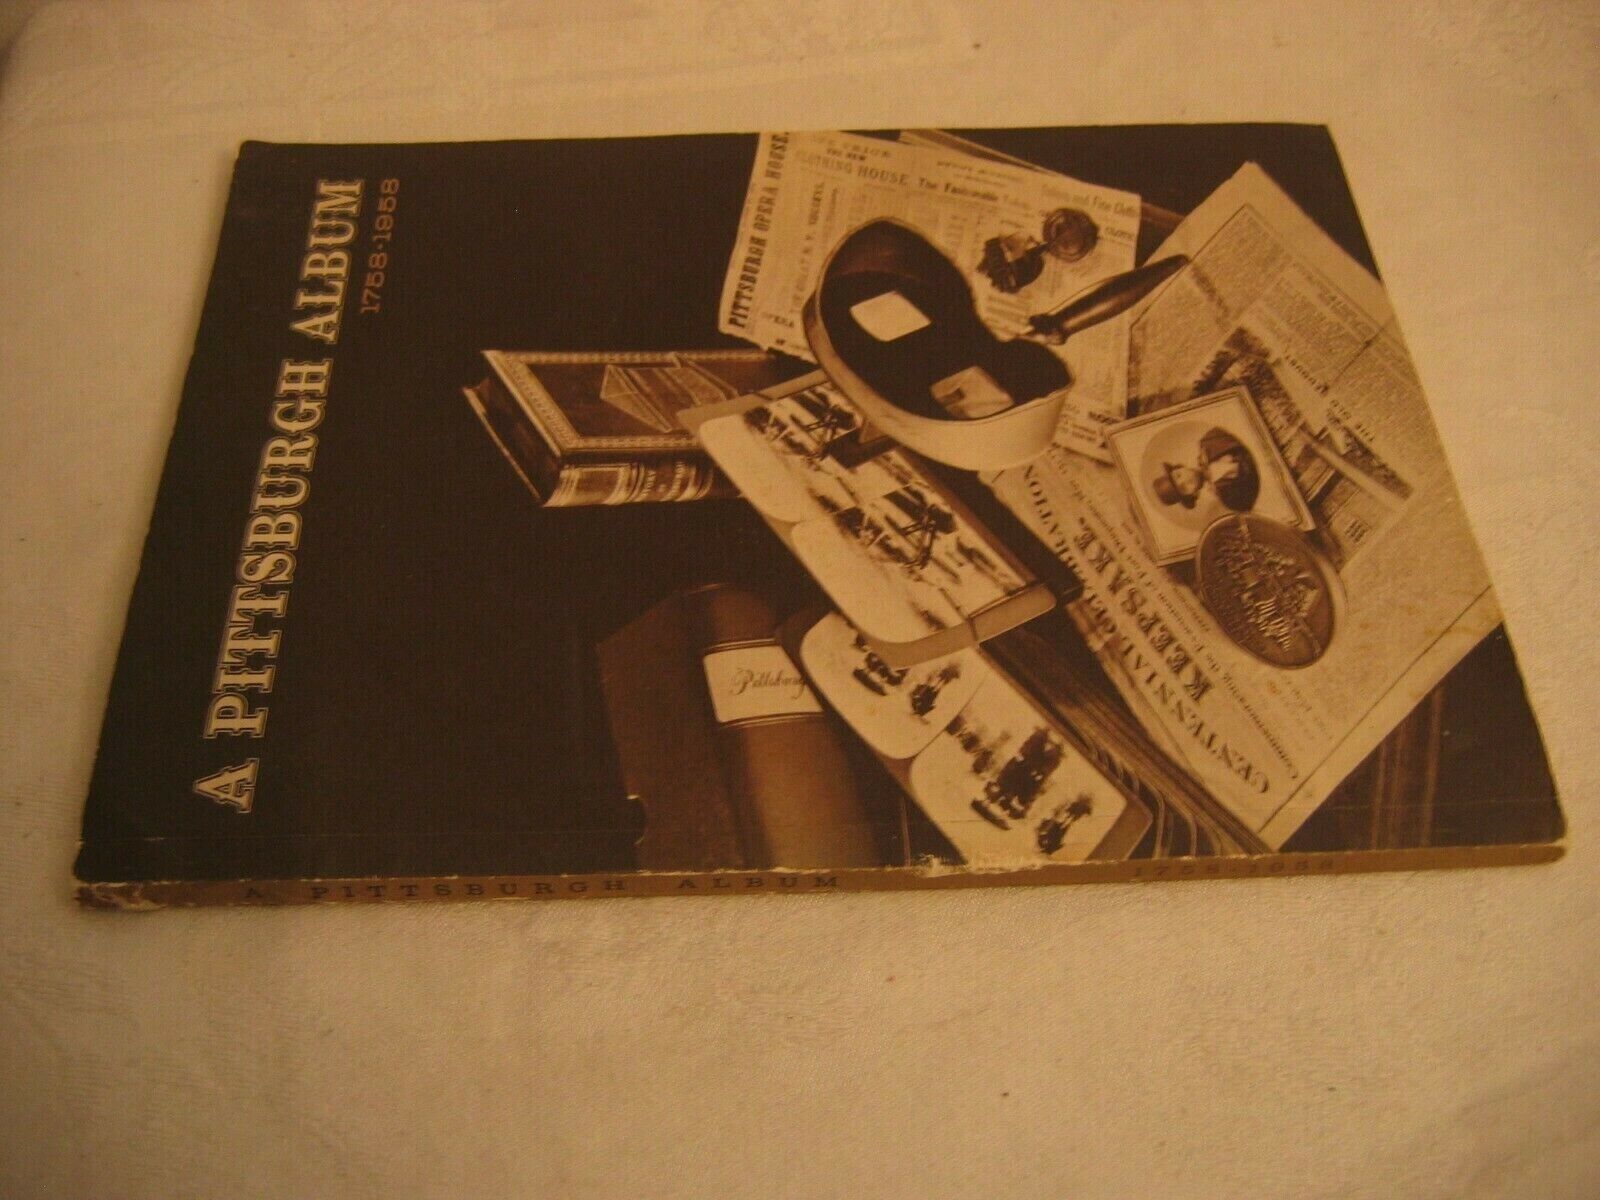 1959 A PITTSBURGH ALBUM 1758-1958 PB 200 Years Memories in Pictures & Text